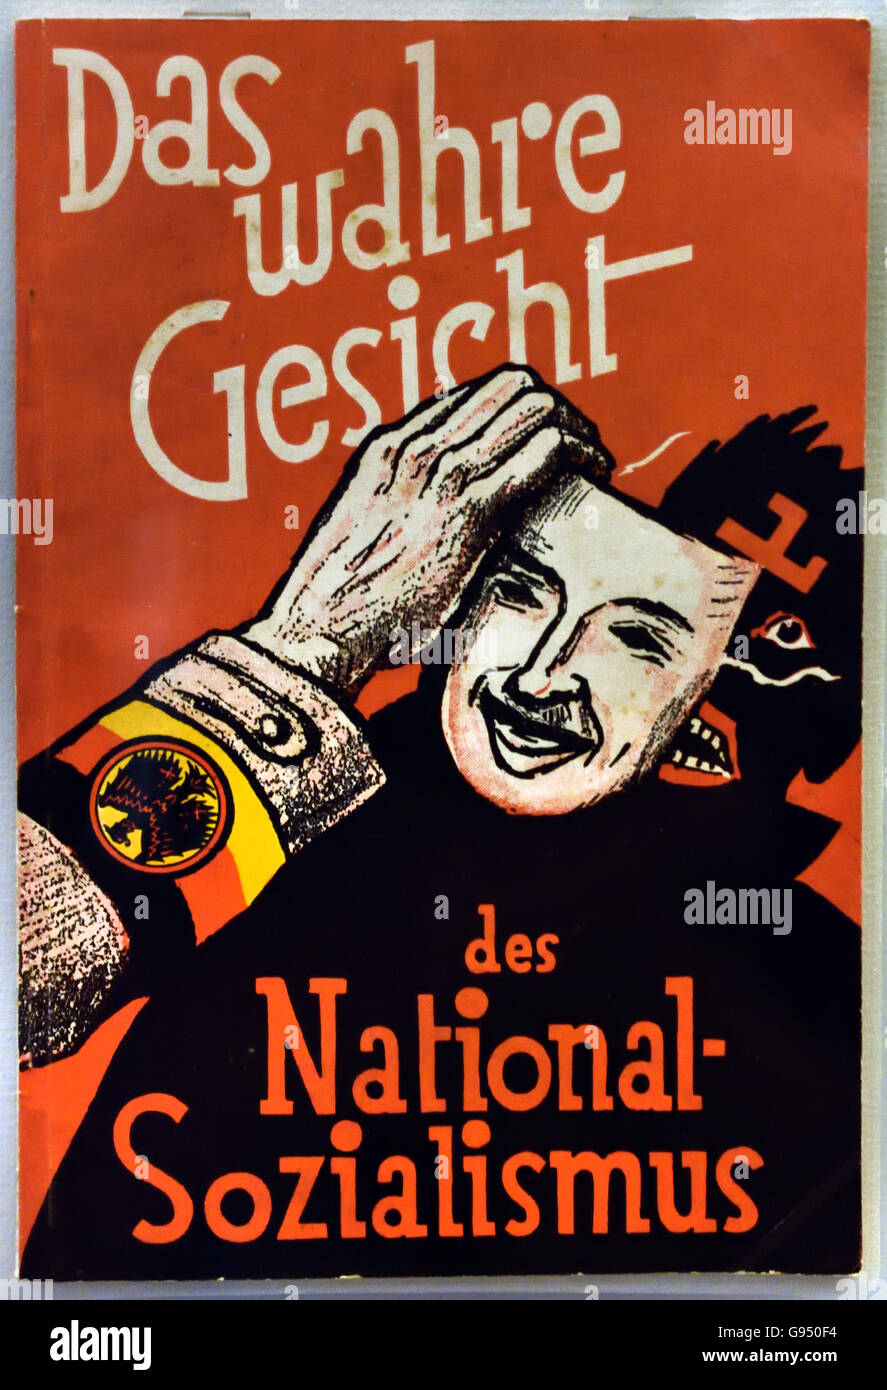 Das Wahre Gesicht des Nation Sozialismus - The True Face of the National Socialism Otto Horsing 1874-1937 Berlin Nazi Germany Stock Photo